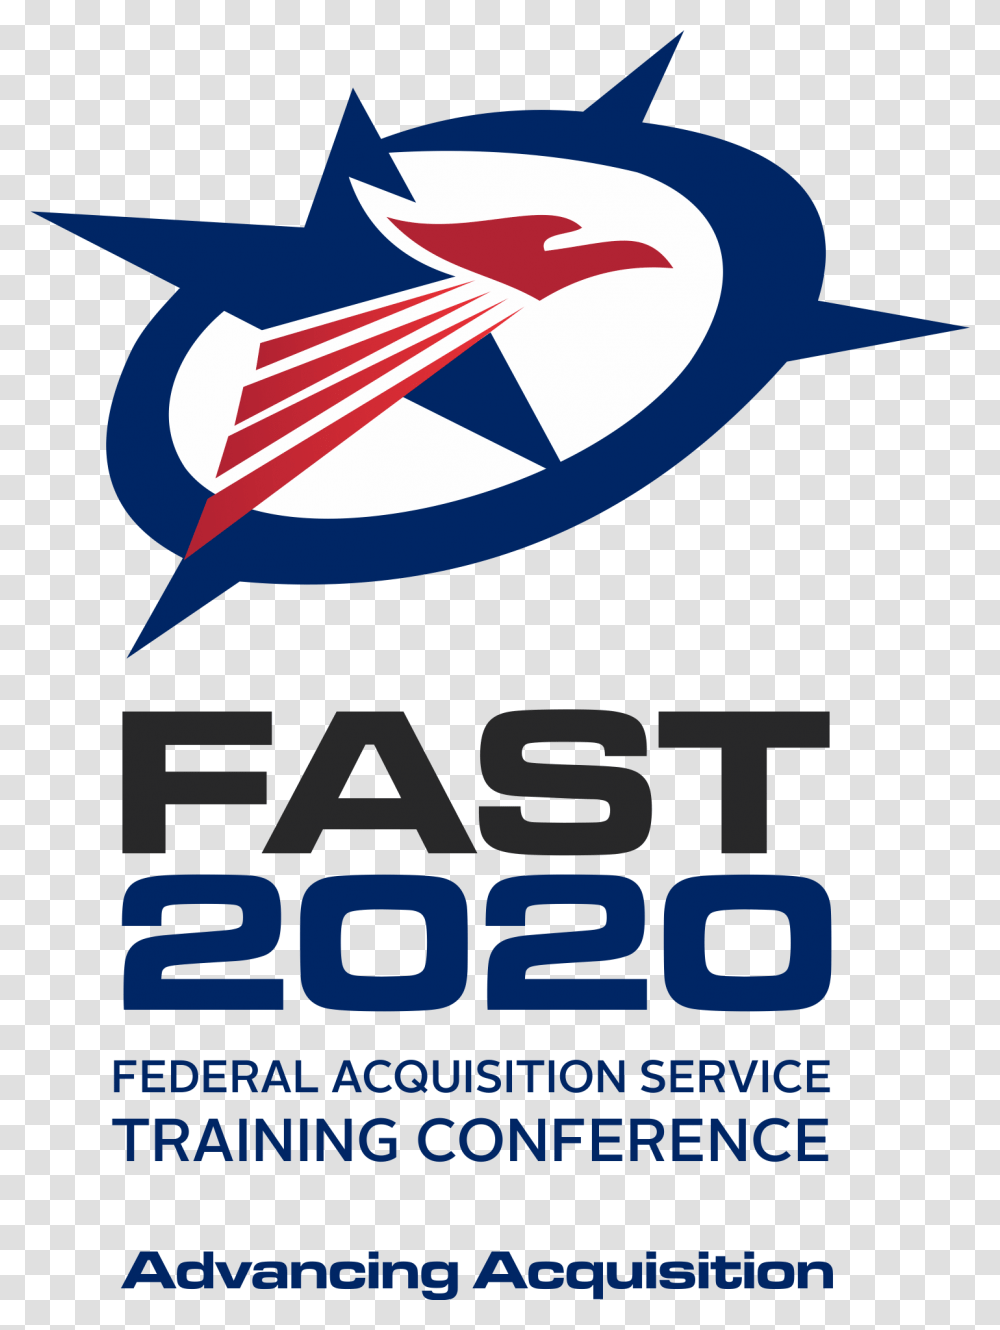 Fast 2020 Fast Federal Acquisition Service Training Conference, Logo, Trademark, Star Symbol Transparent Png